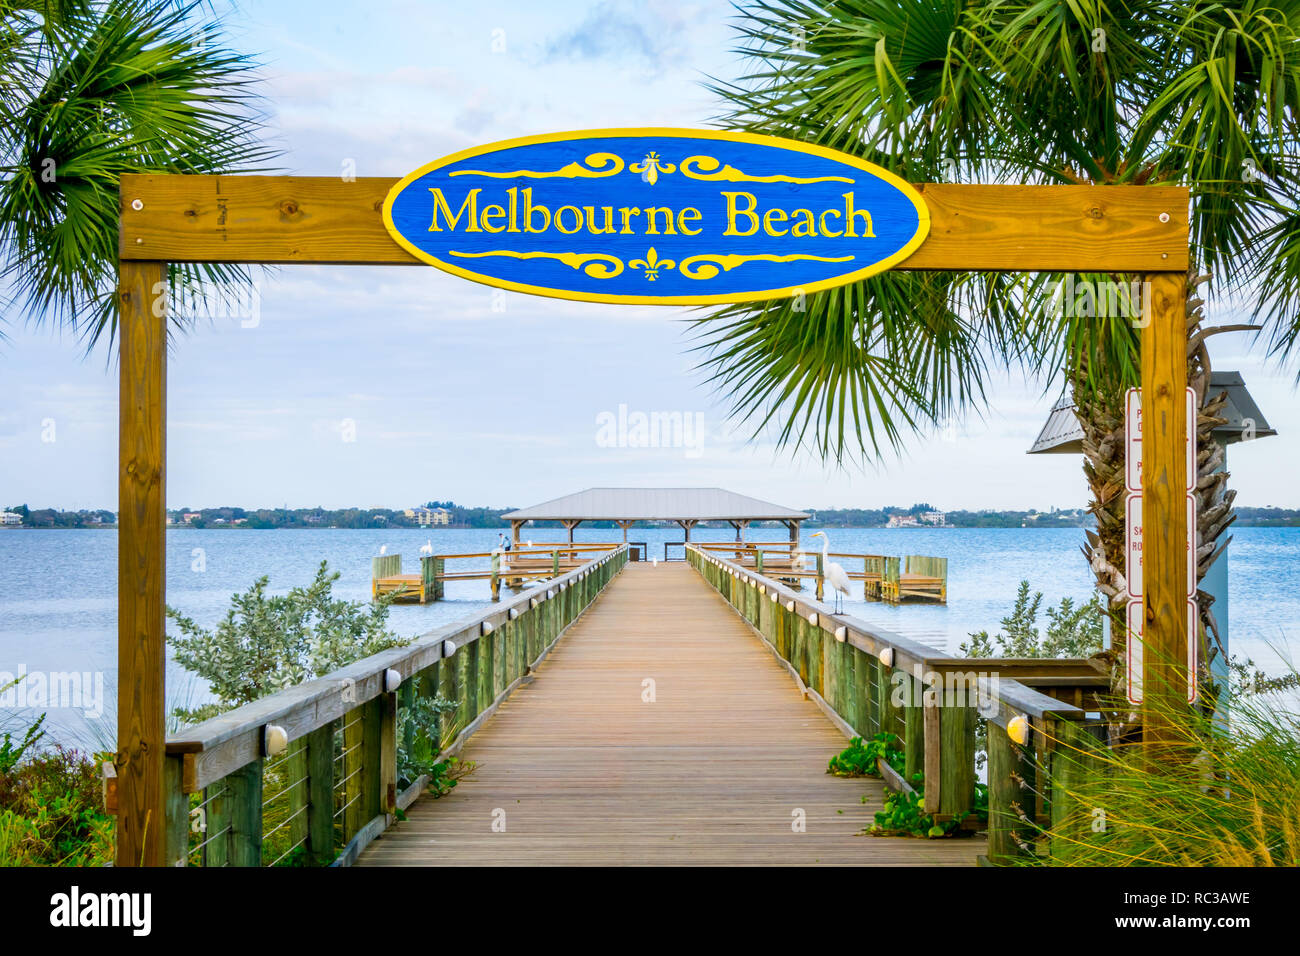 Melbourne Beach, Florida, USA - January 12, 2019: Historic Melbourne Beach Pier located on the Indian River. Stock Photo